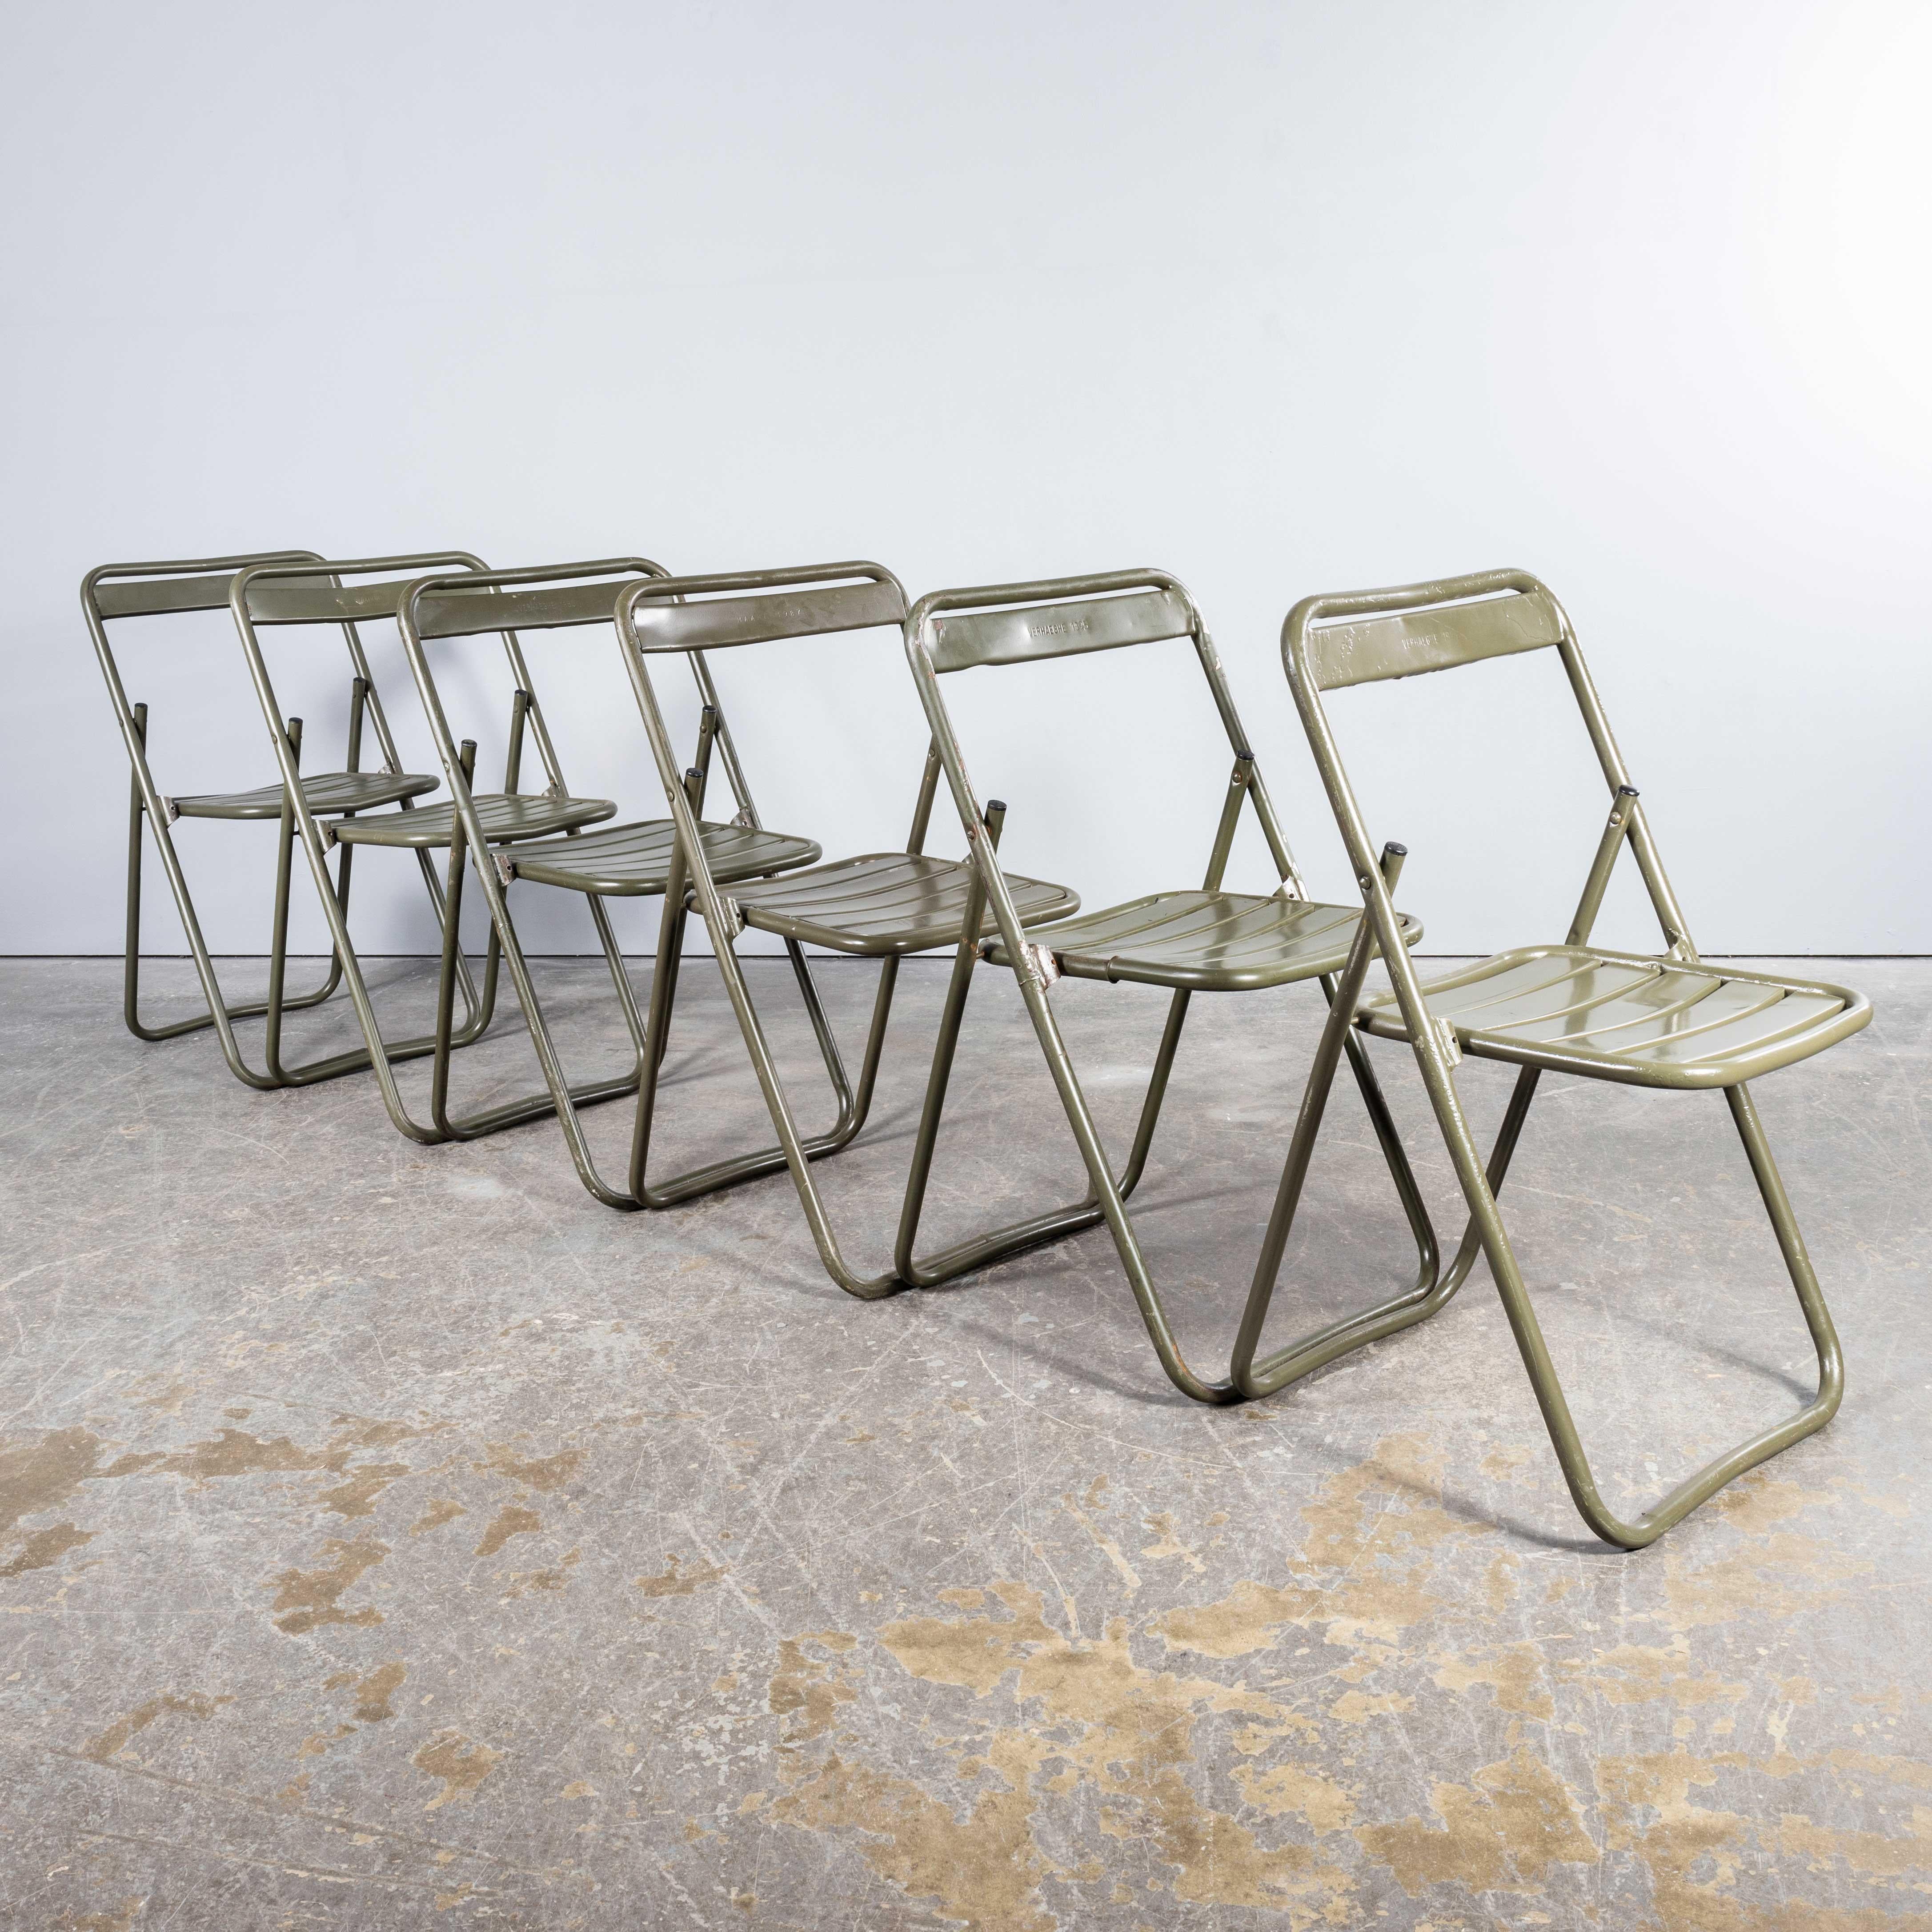 1970's New Old Stock Original French Army Surplus Folding Chairs - Very Large Qu For Sale 5